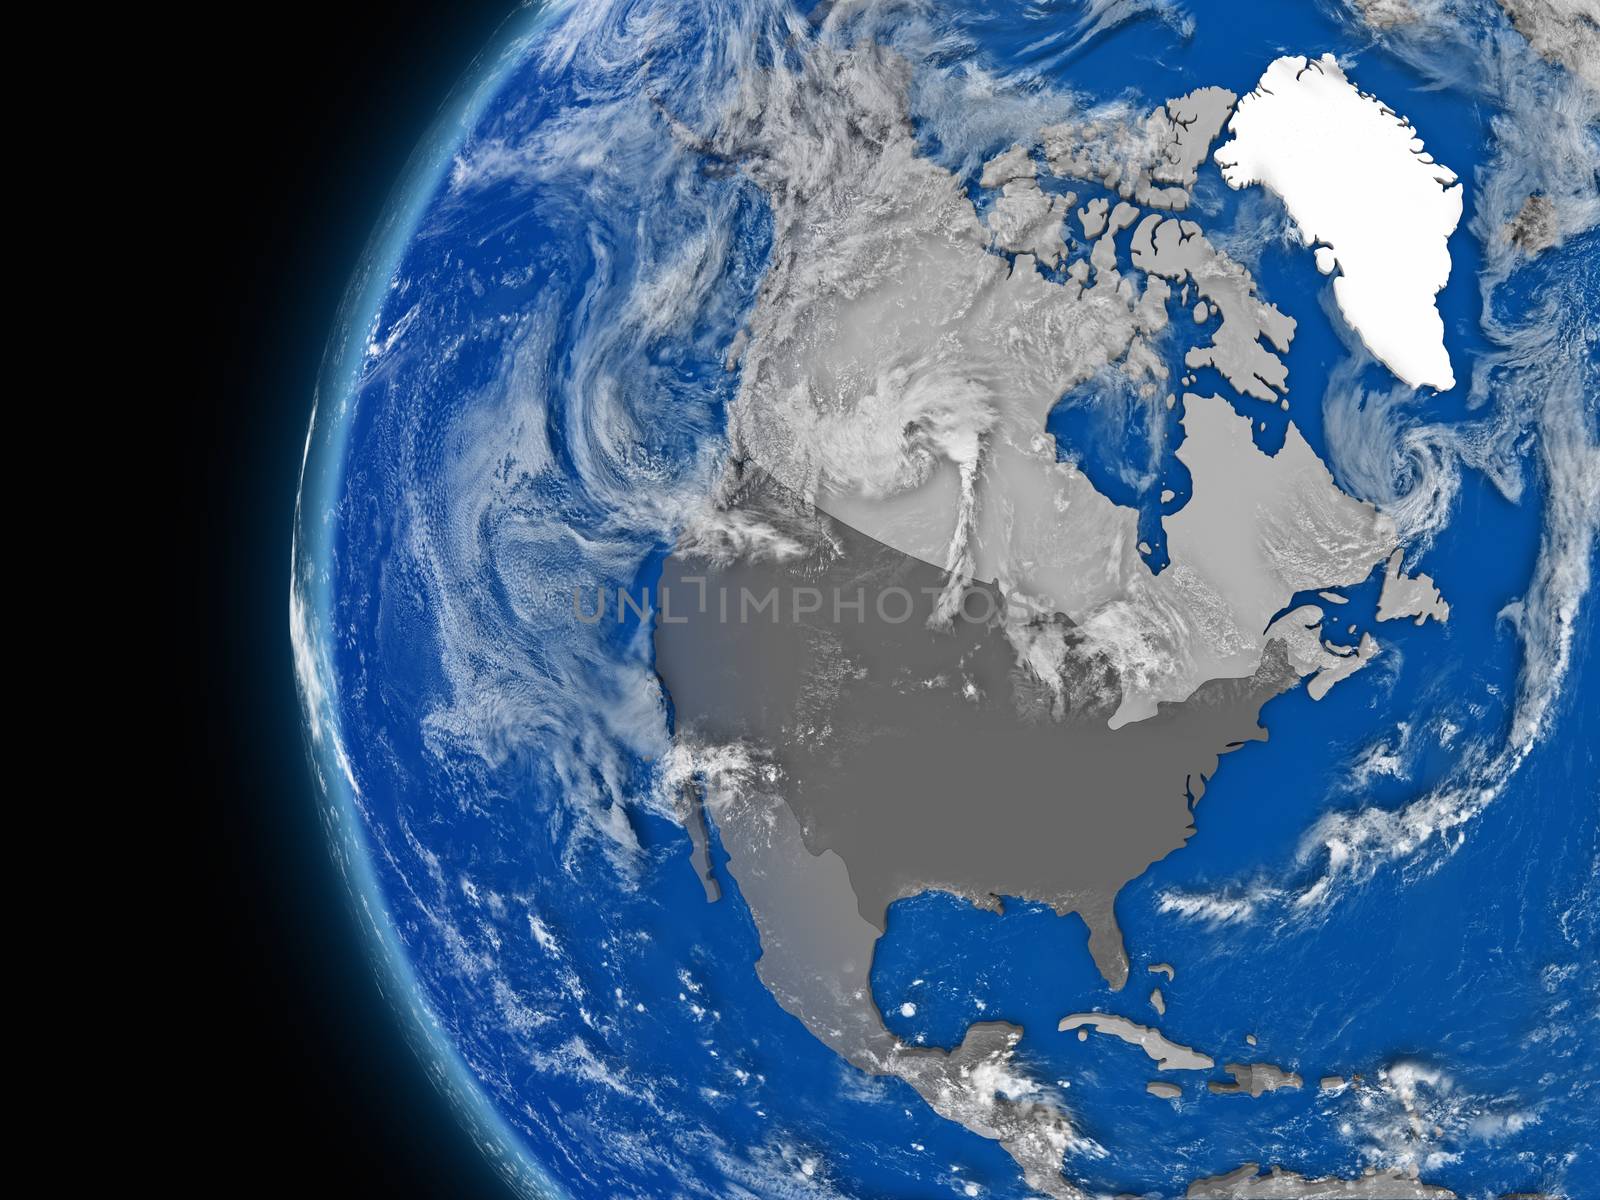 Illustration of north american continent on political globe with atmospheric features and clouds